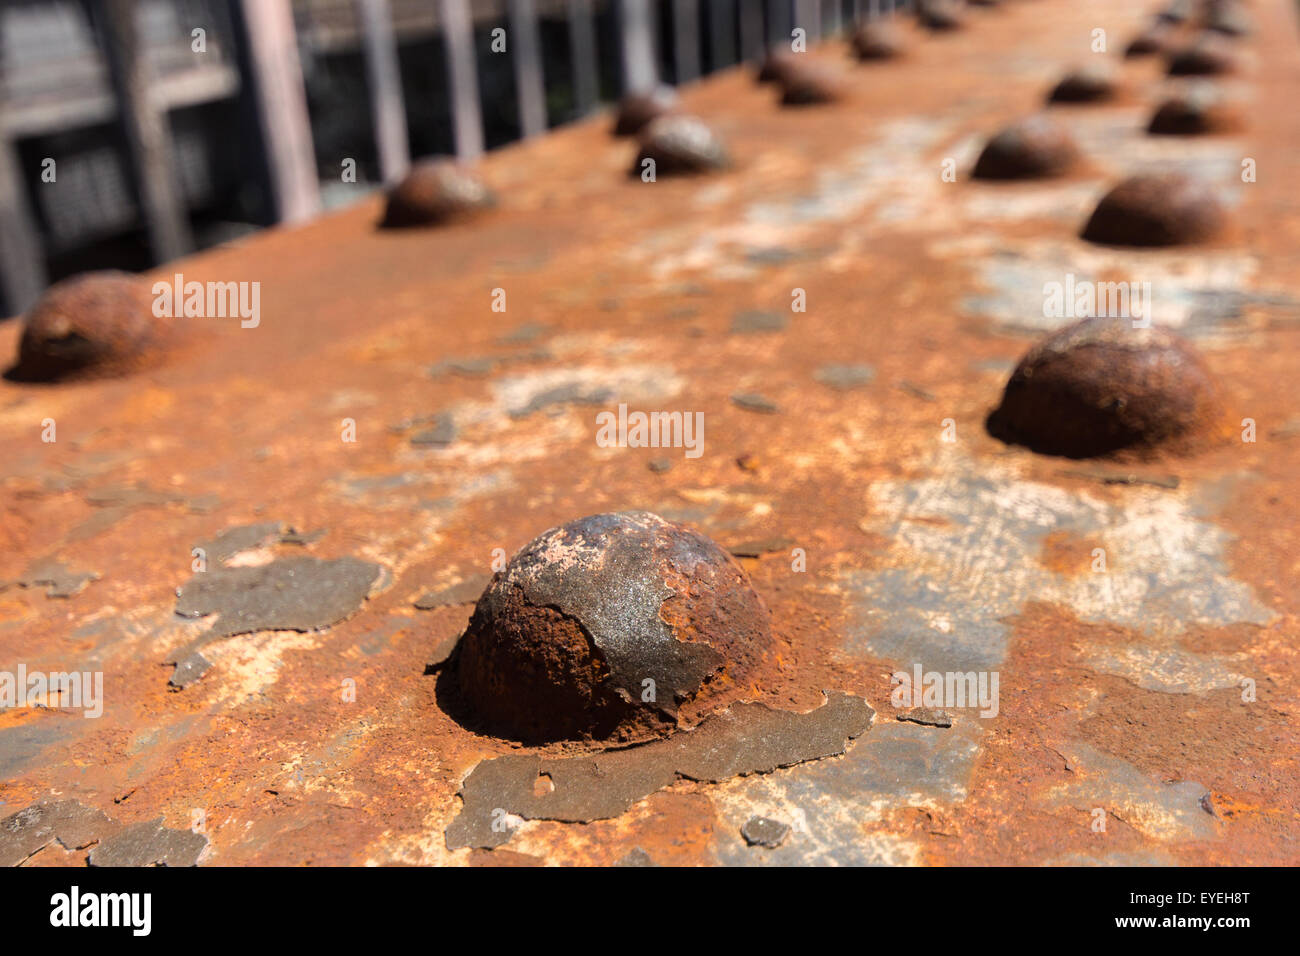 old rusted steel - rusty metal / rust texture Stock Photo